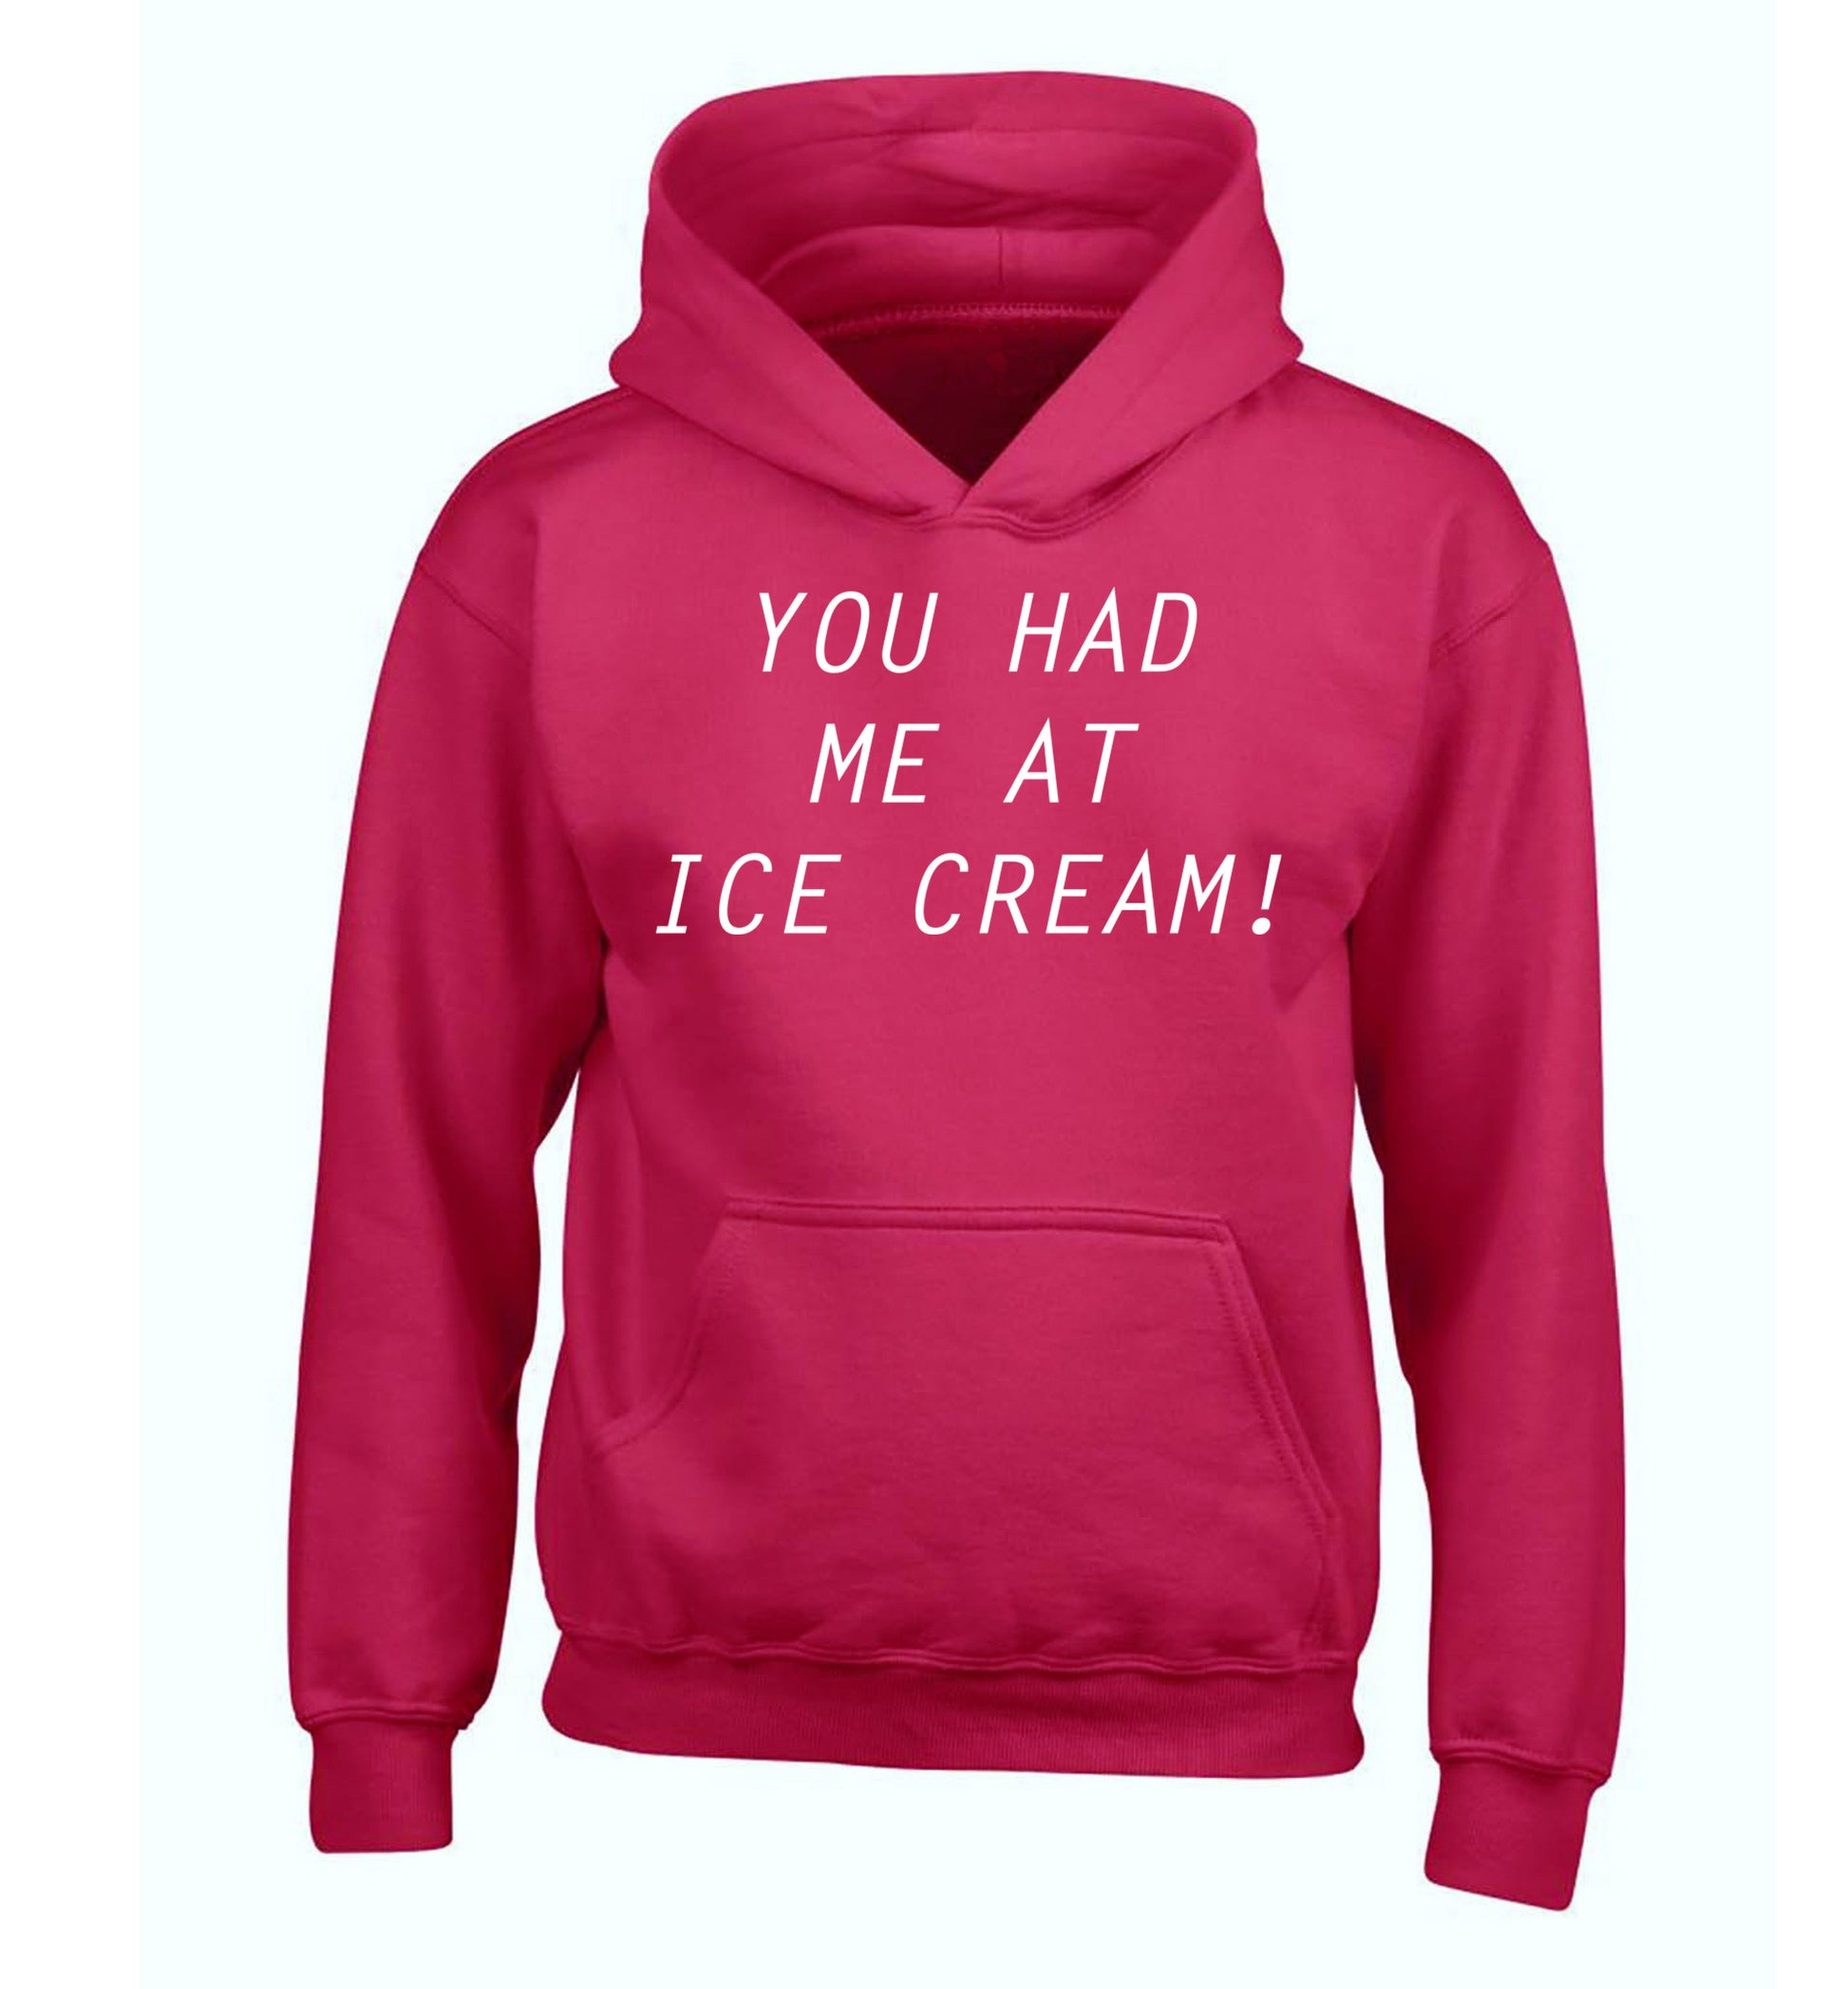 You had me at ice cream children's pink hoodie 12-14 Years